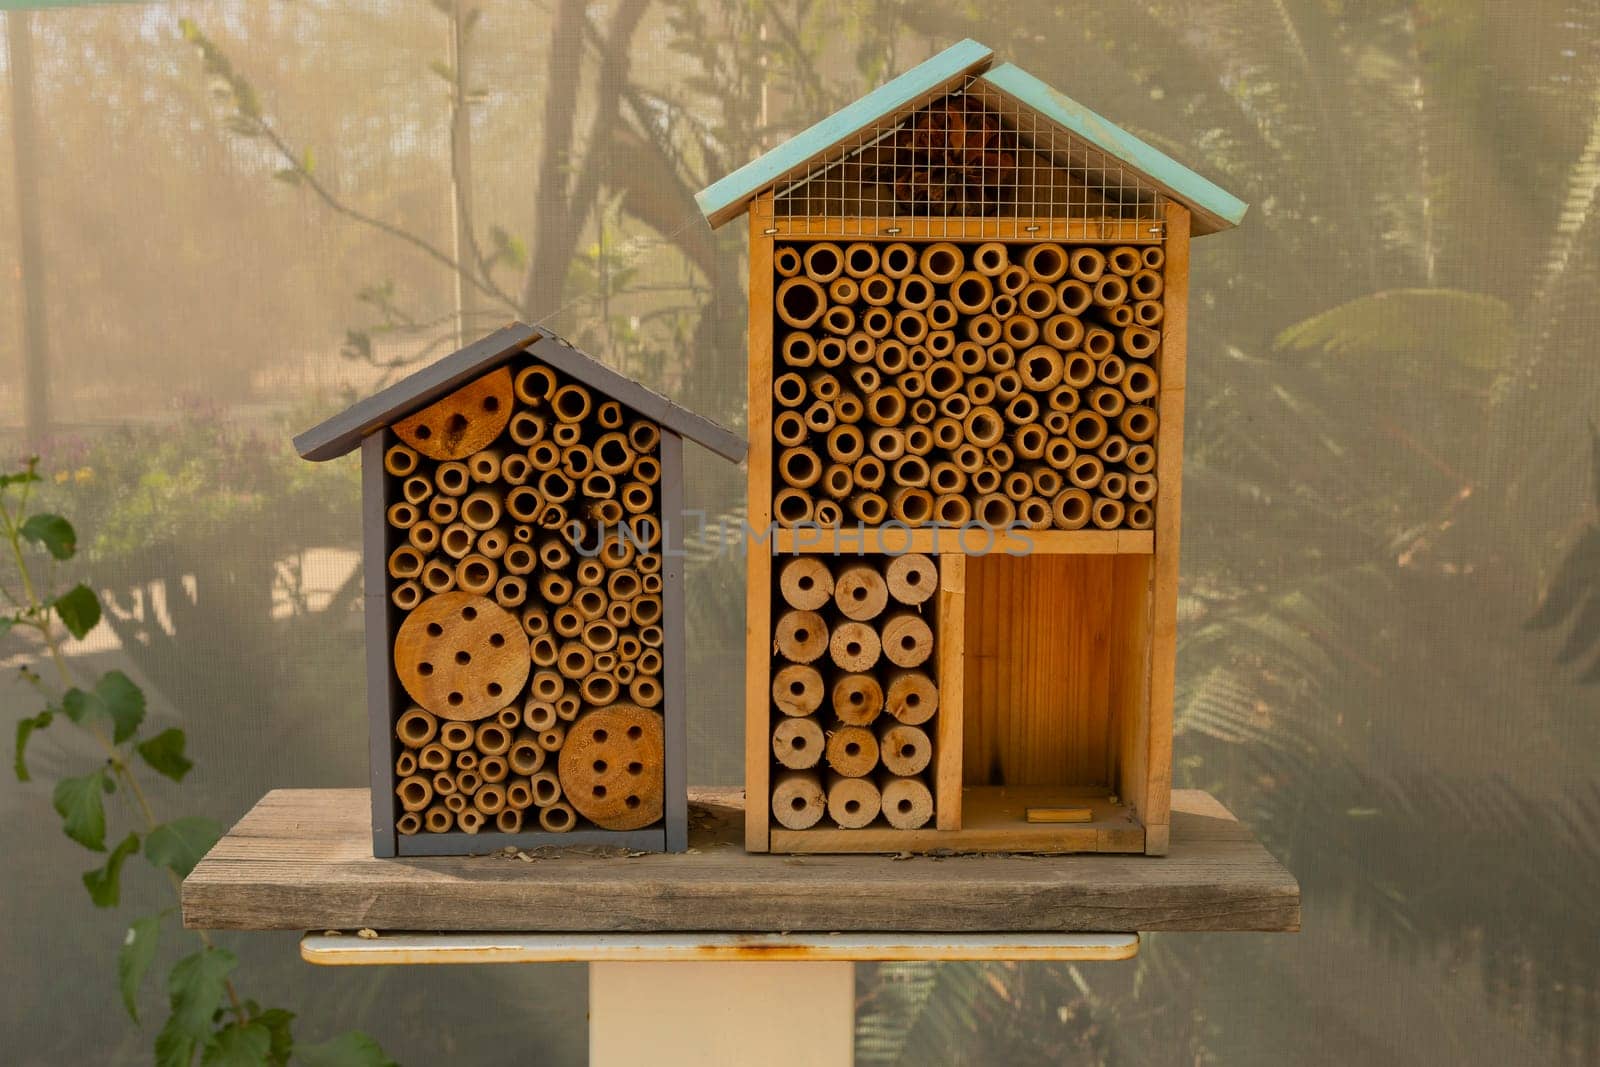 Wooden Insect House, Decorative Bug Hotel, Ladybird And Bee, Fly. Compartments And Natural Components. Outdoor Eco Home For Butterfly Hibernation And Ecological Gardening. Horizontal Plane.